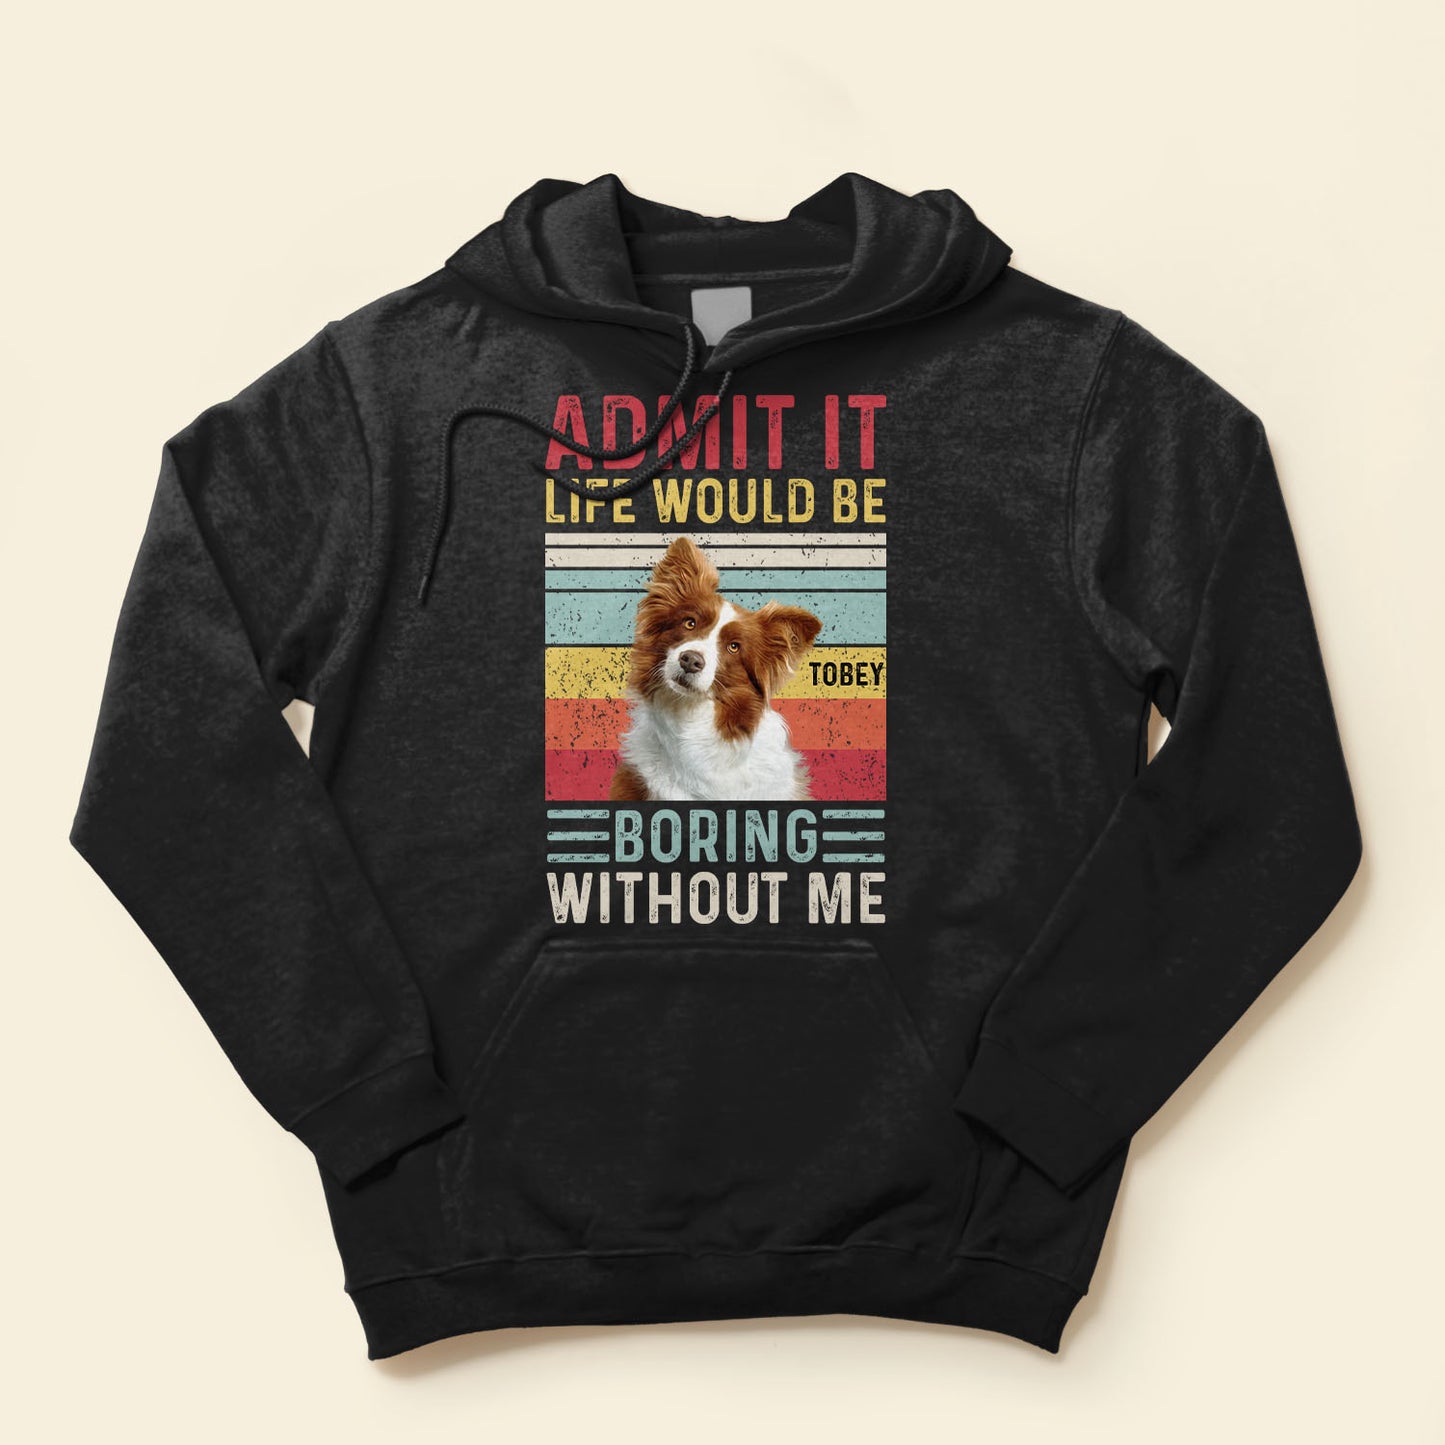 Admit It Life Would Be Boring Without Me - Personalized Photo Shirt